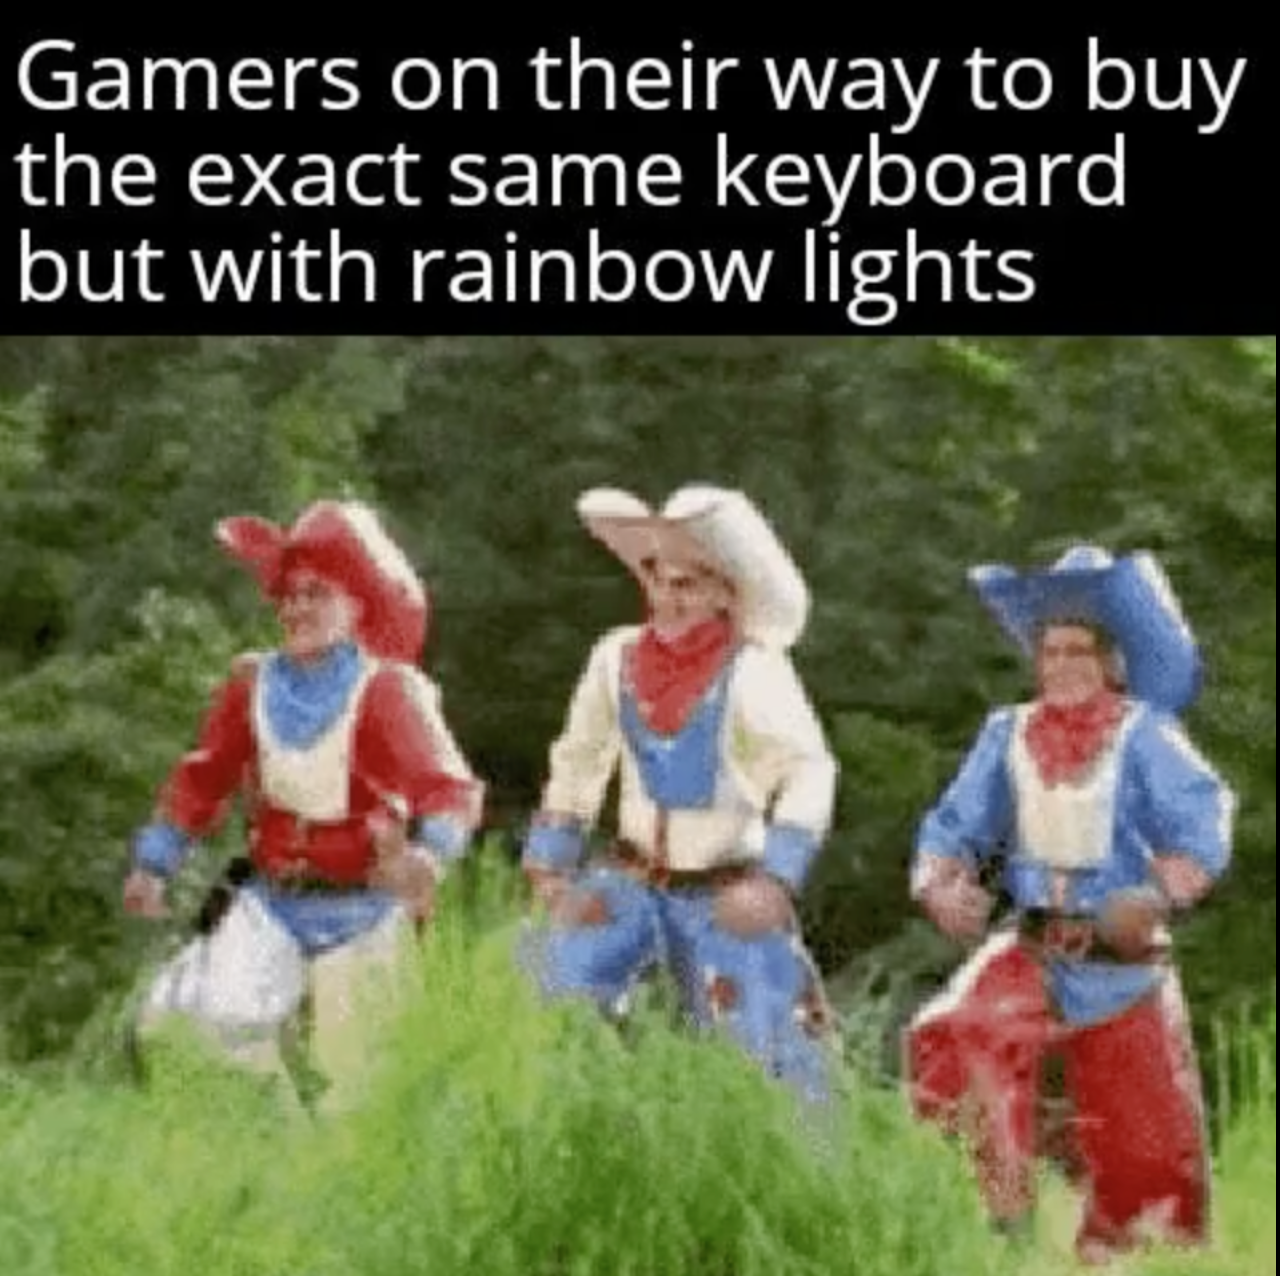 funny gaming memes - garden gnome - Gamers on their way to buy the exact same keyboard but with rainbow lights